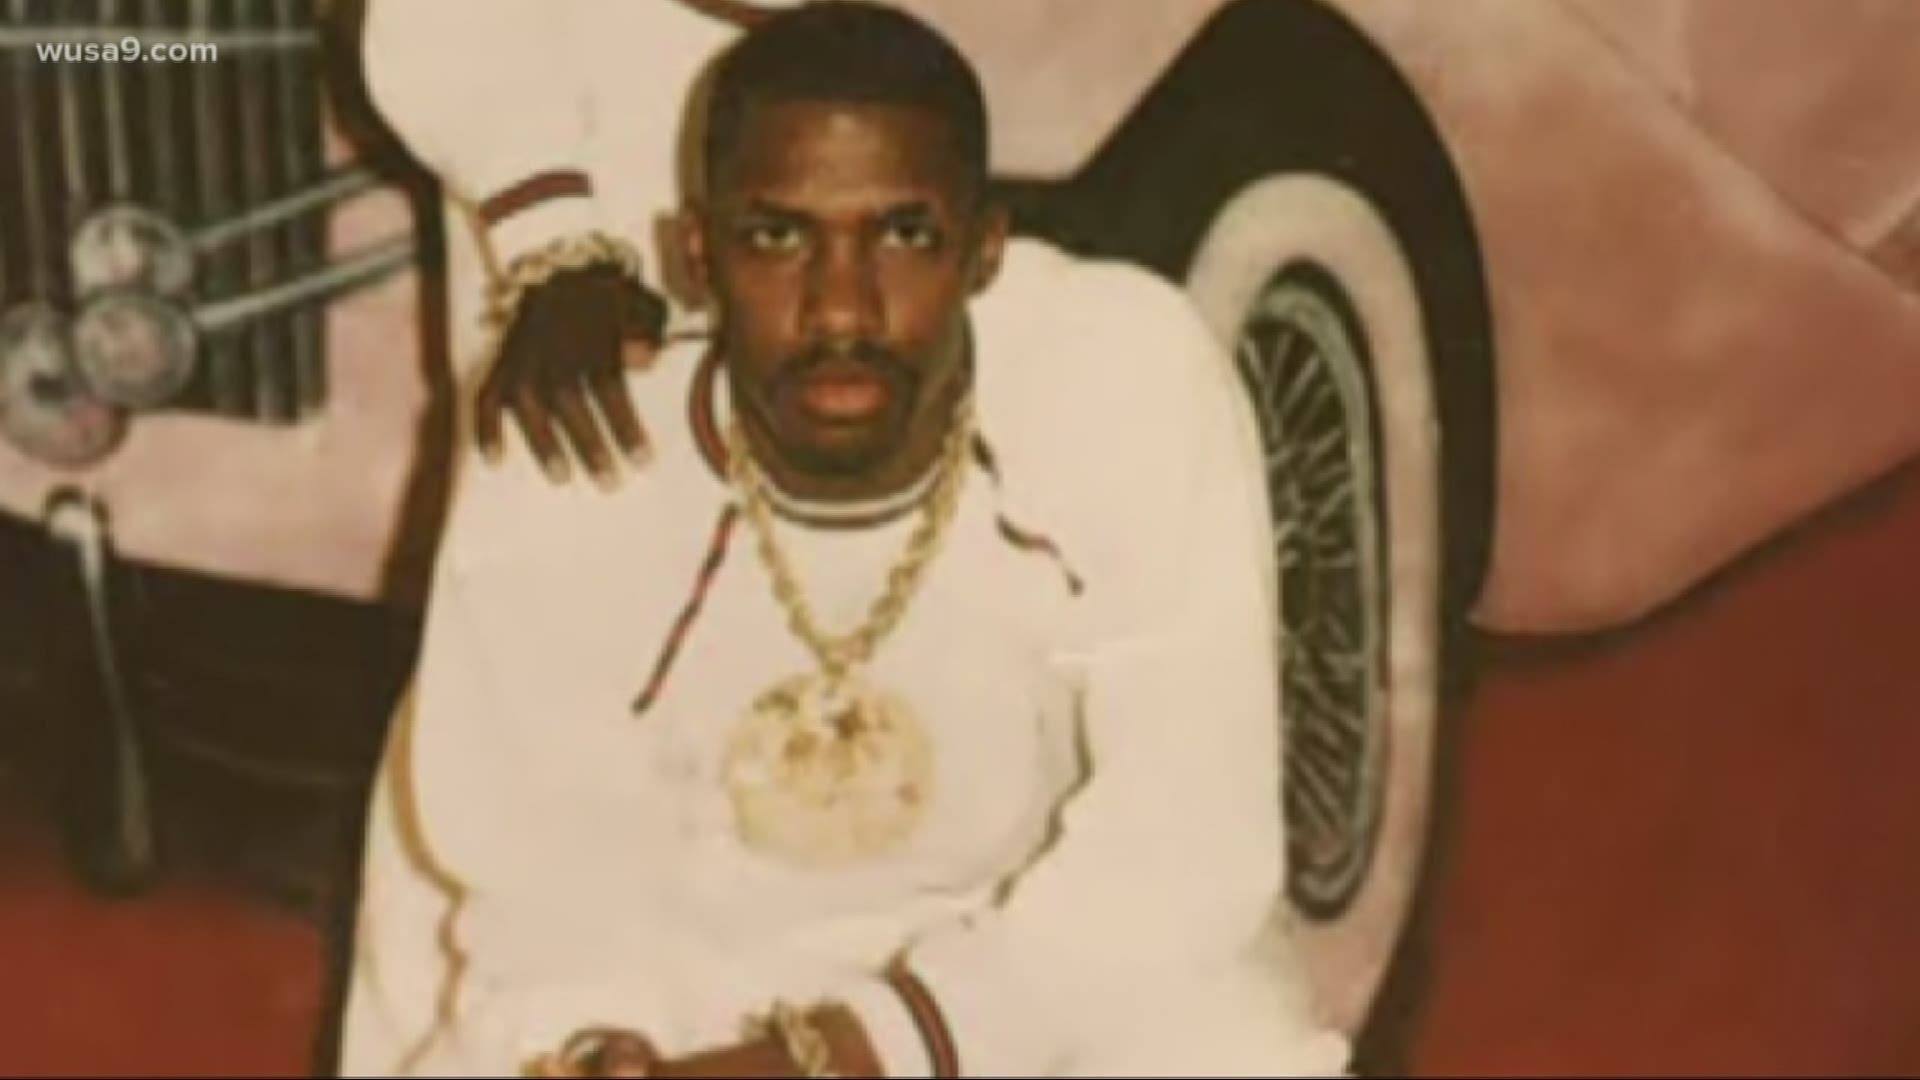 District residents had their first opportunity to weigh in on whether Rayful Edmond, DC’s notorious crack kingpin, will be granted early release from prison.